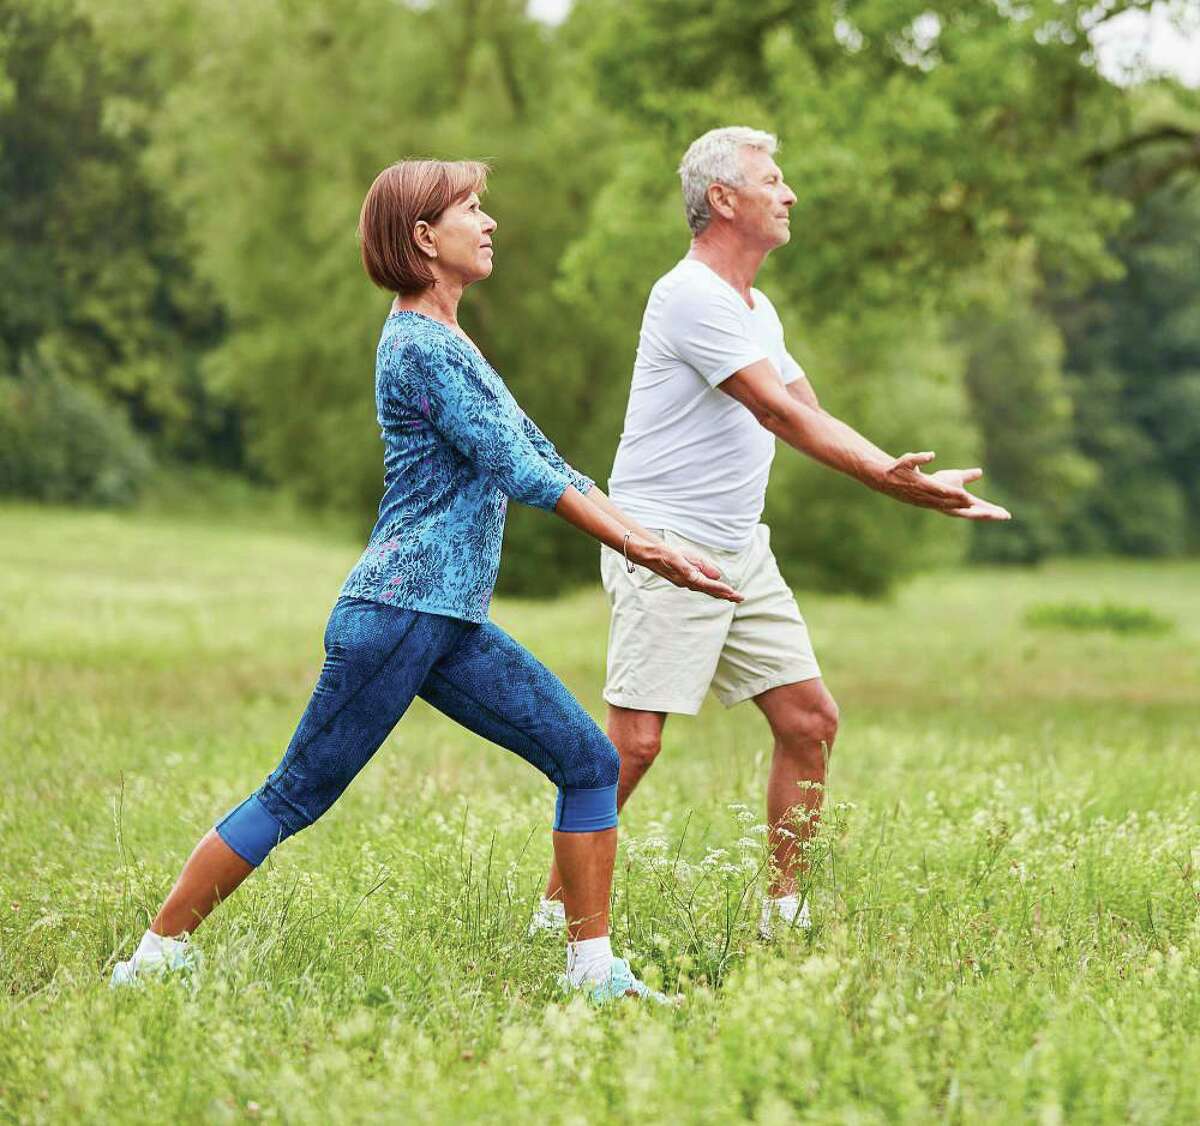 Strengthening core muscles via tai chi and yoga can help prevent falls.